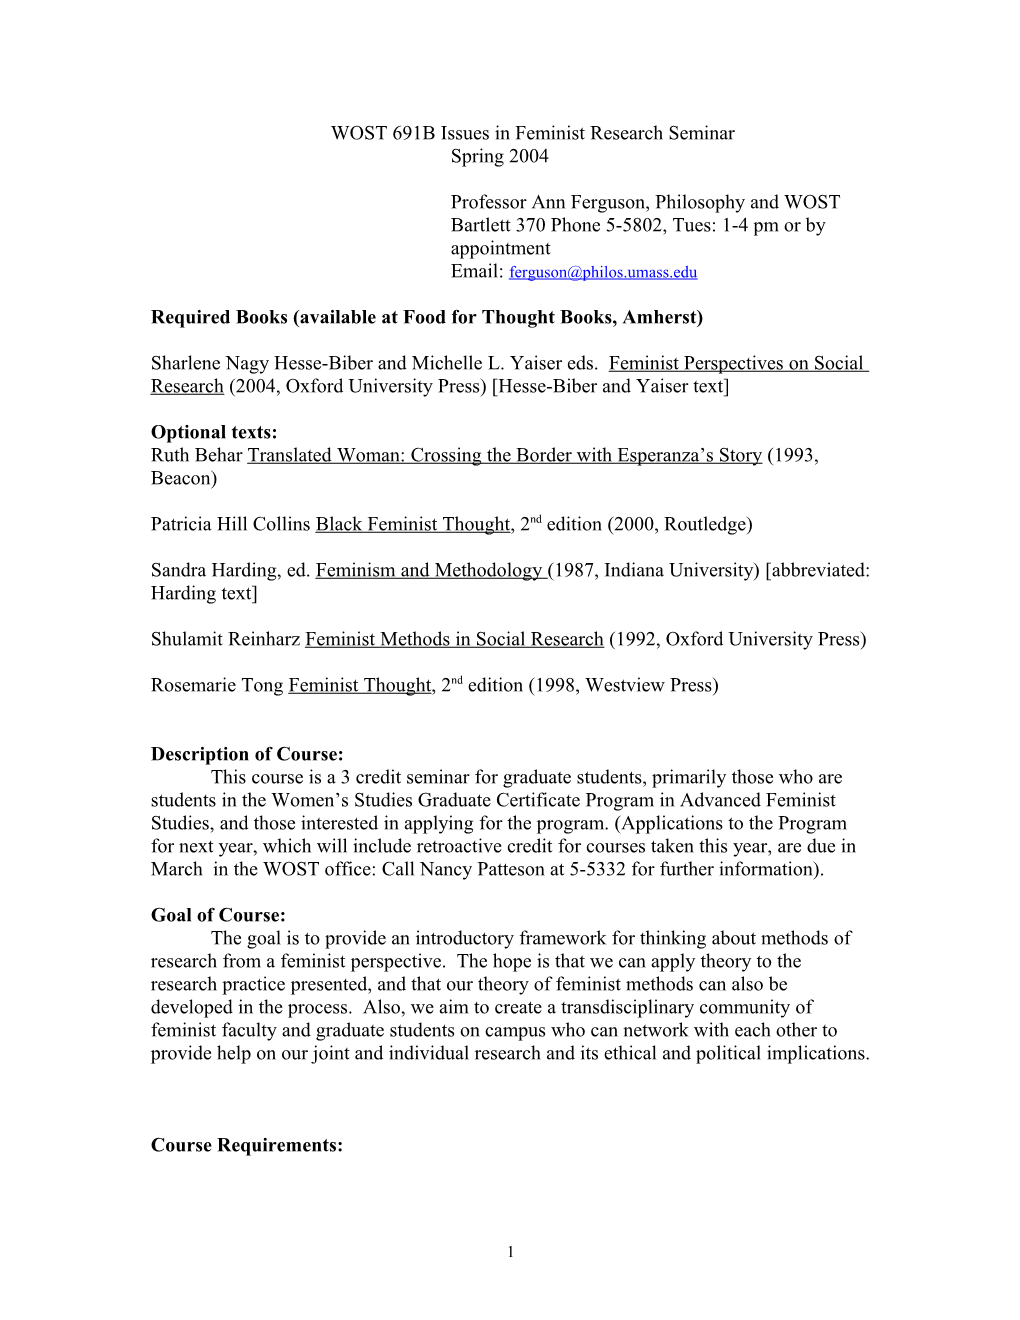 WOST 691B Issues in Feminist Research Seminar